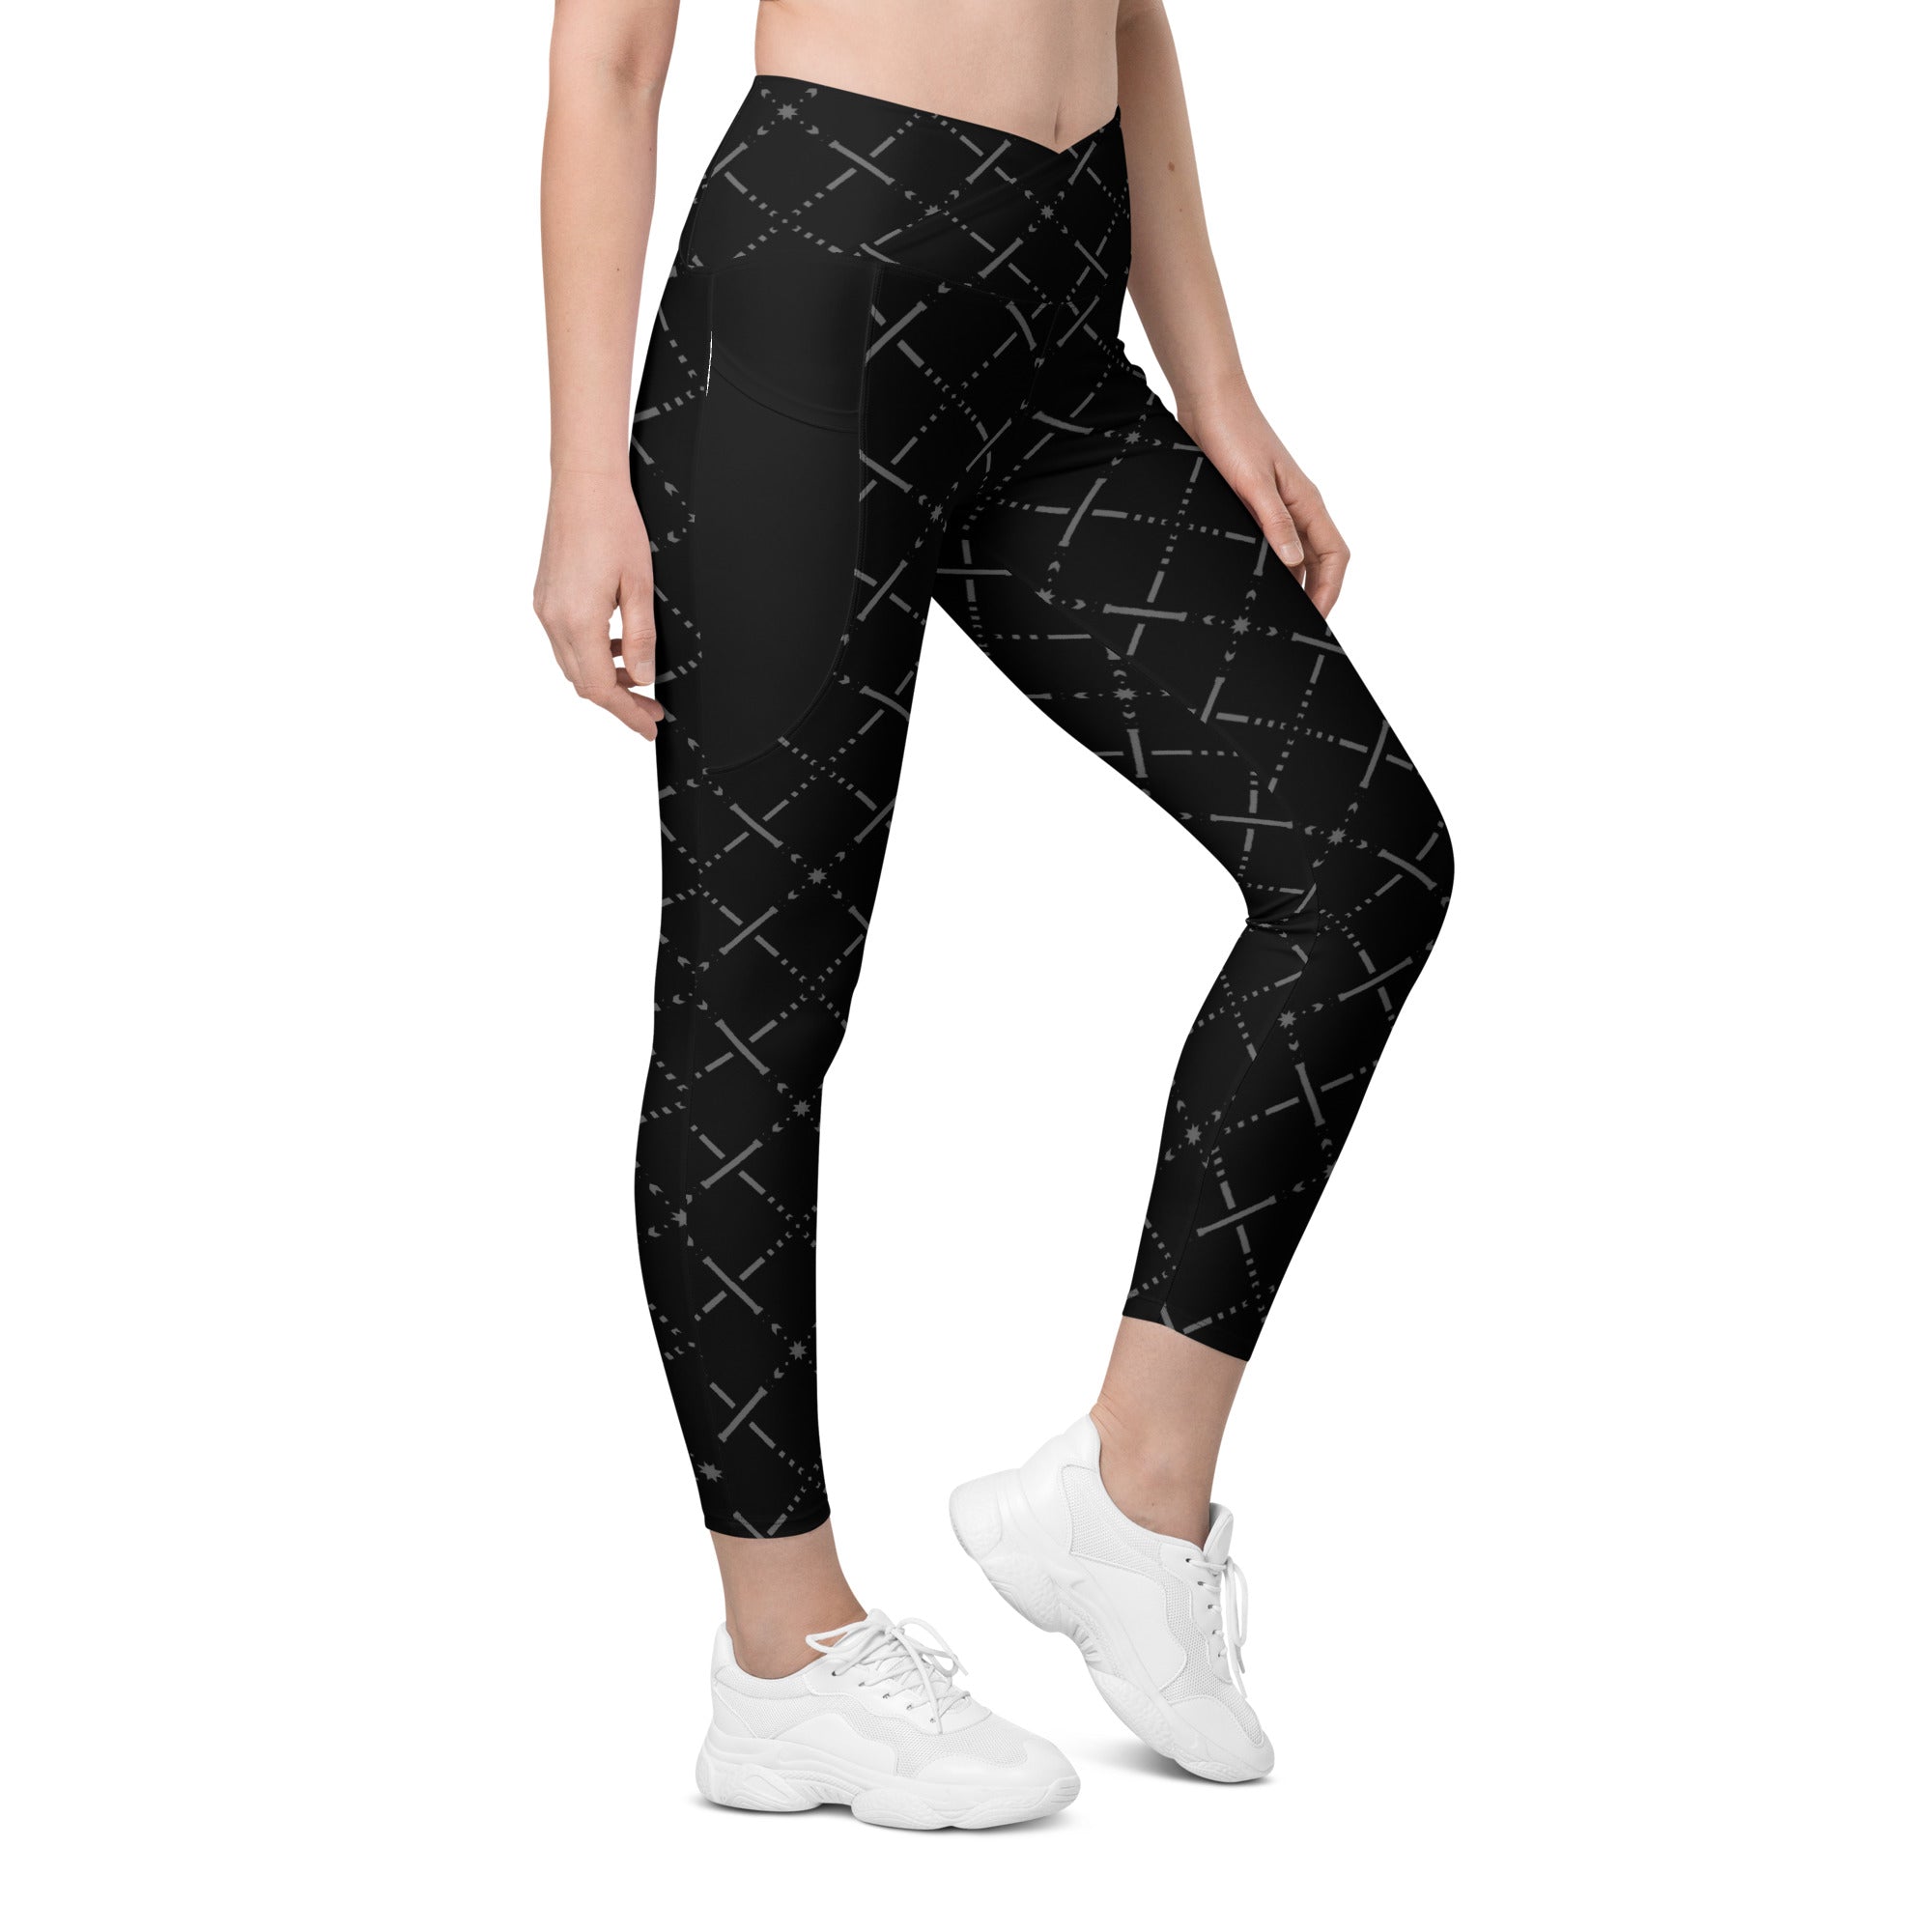 Active lifestyle with Neon Nights Crossover Leggings in neon color theme.